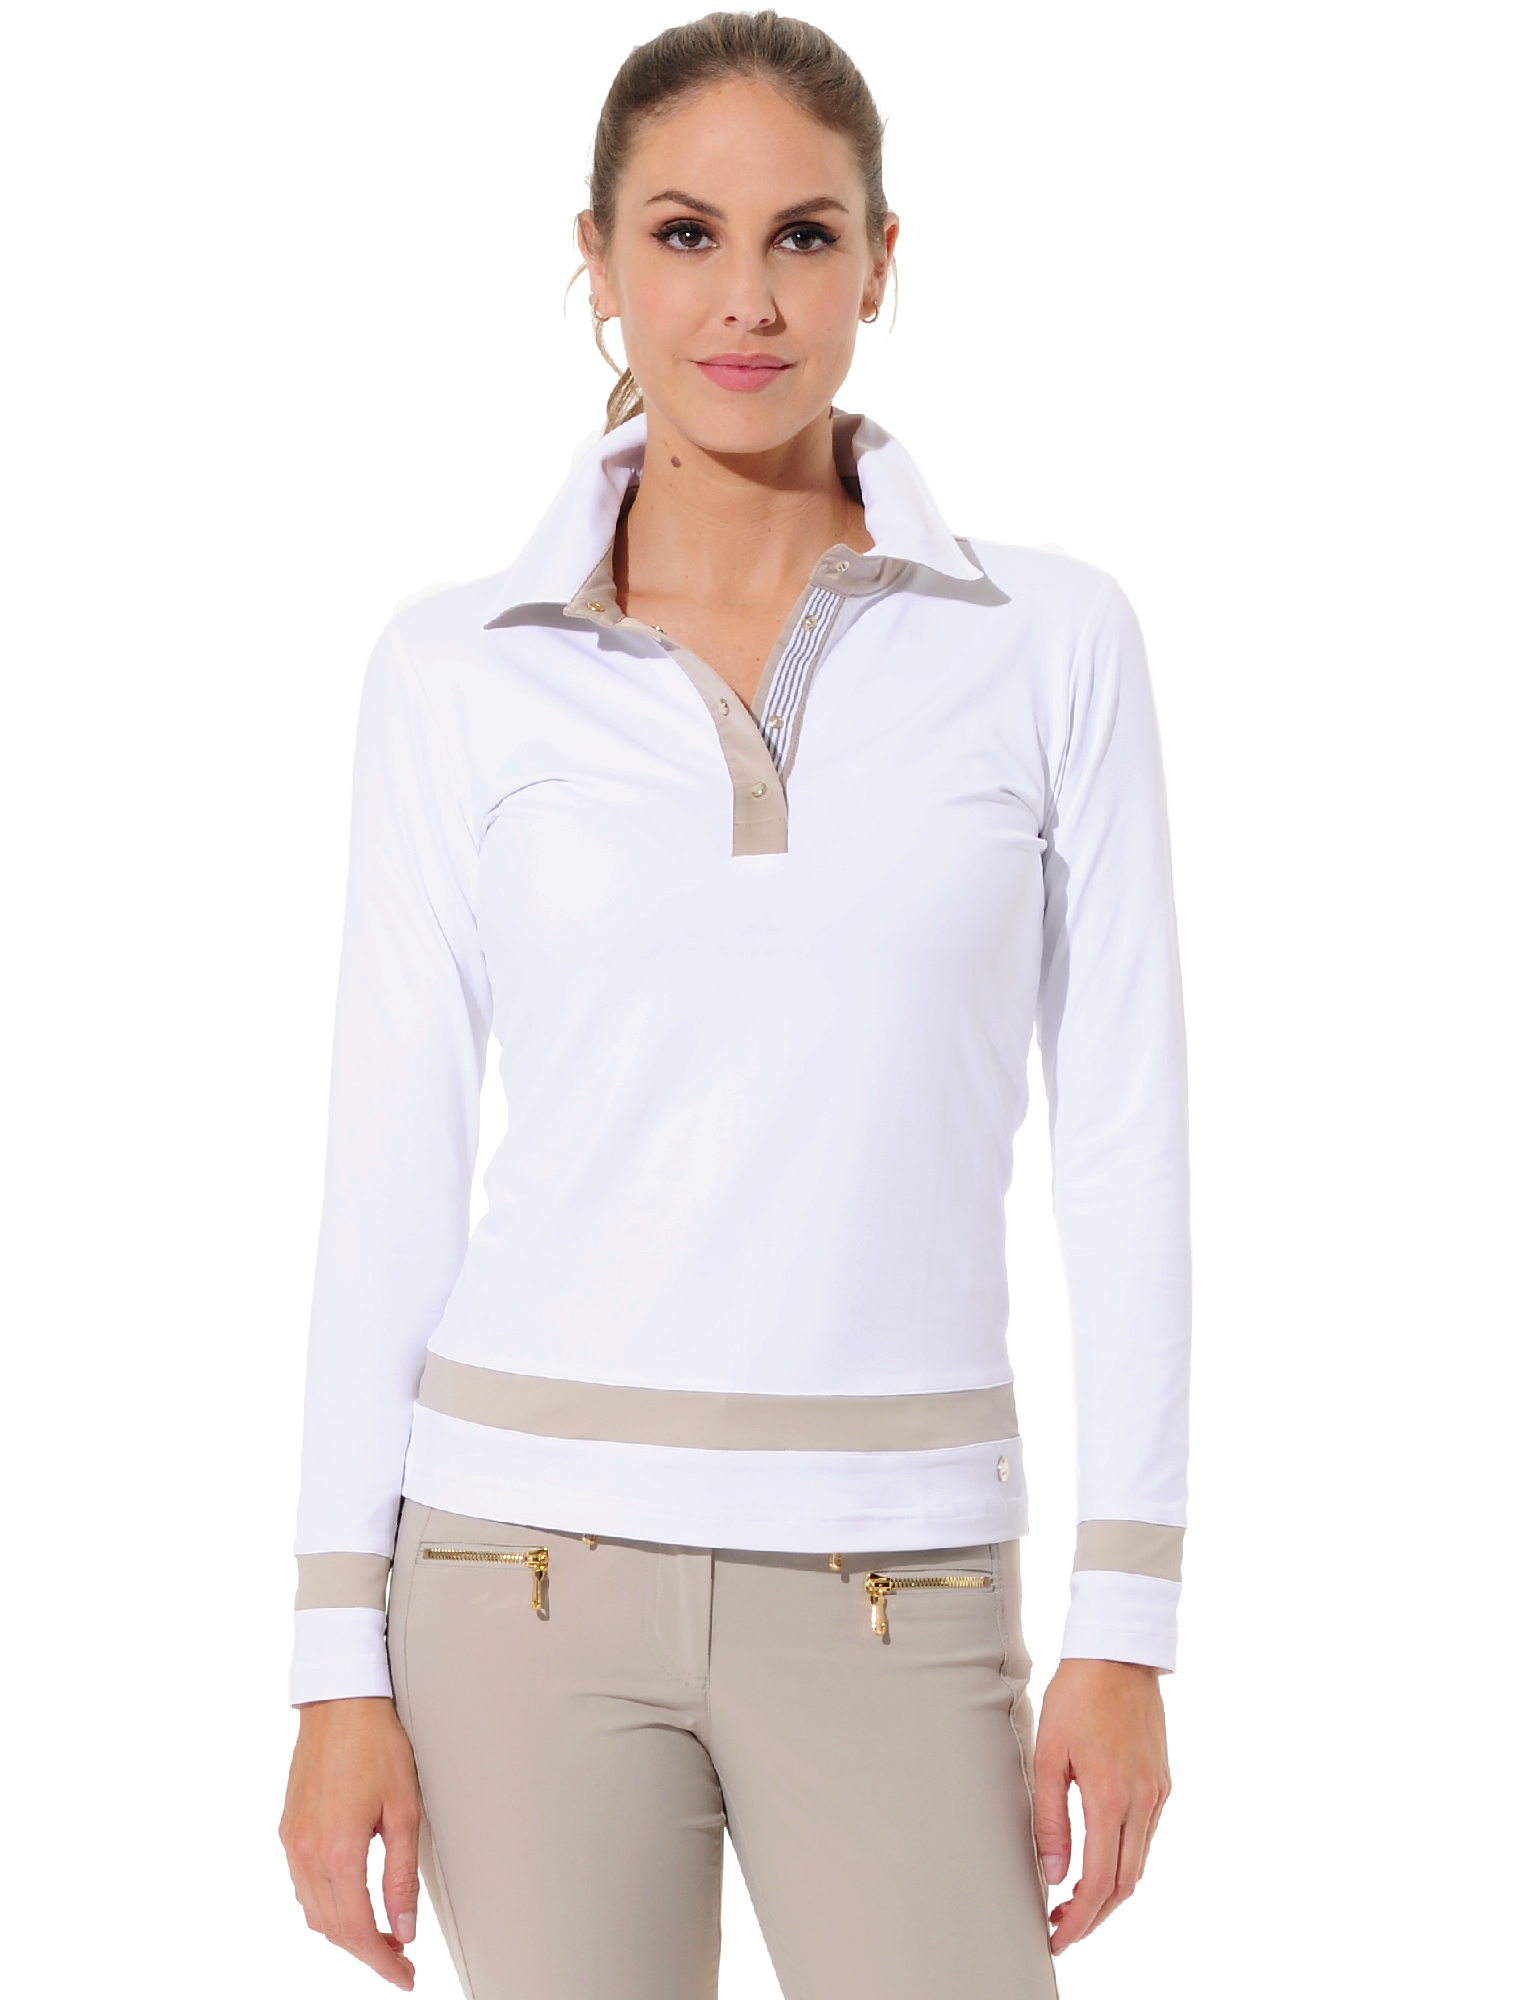 Jersey golf polo shirt white/light taupe 